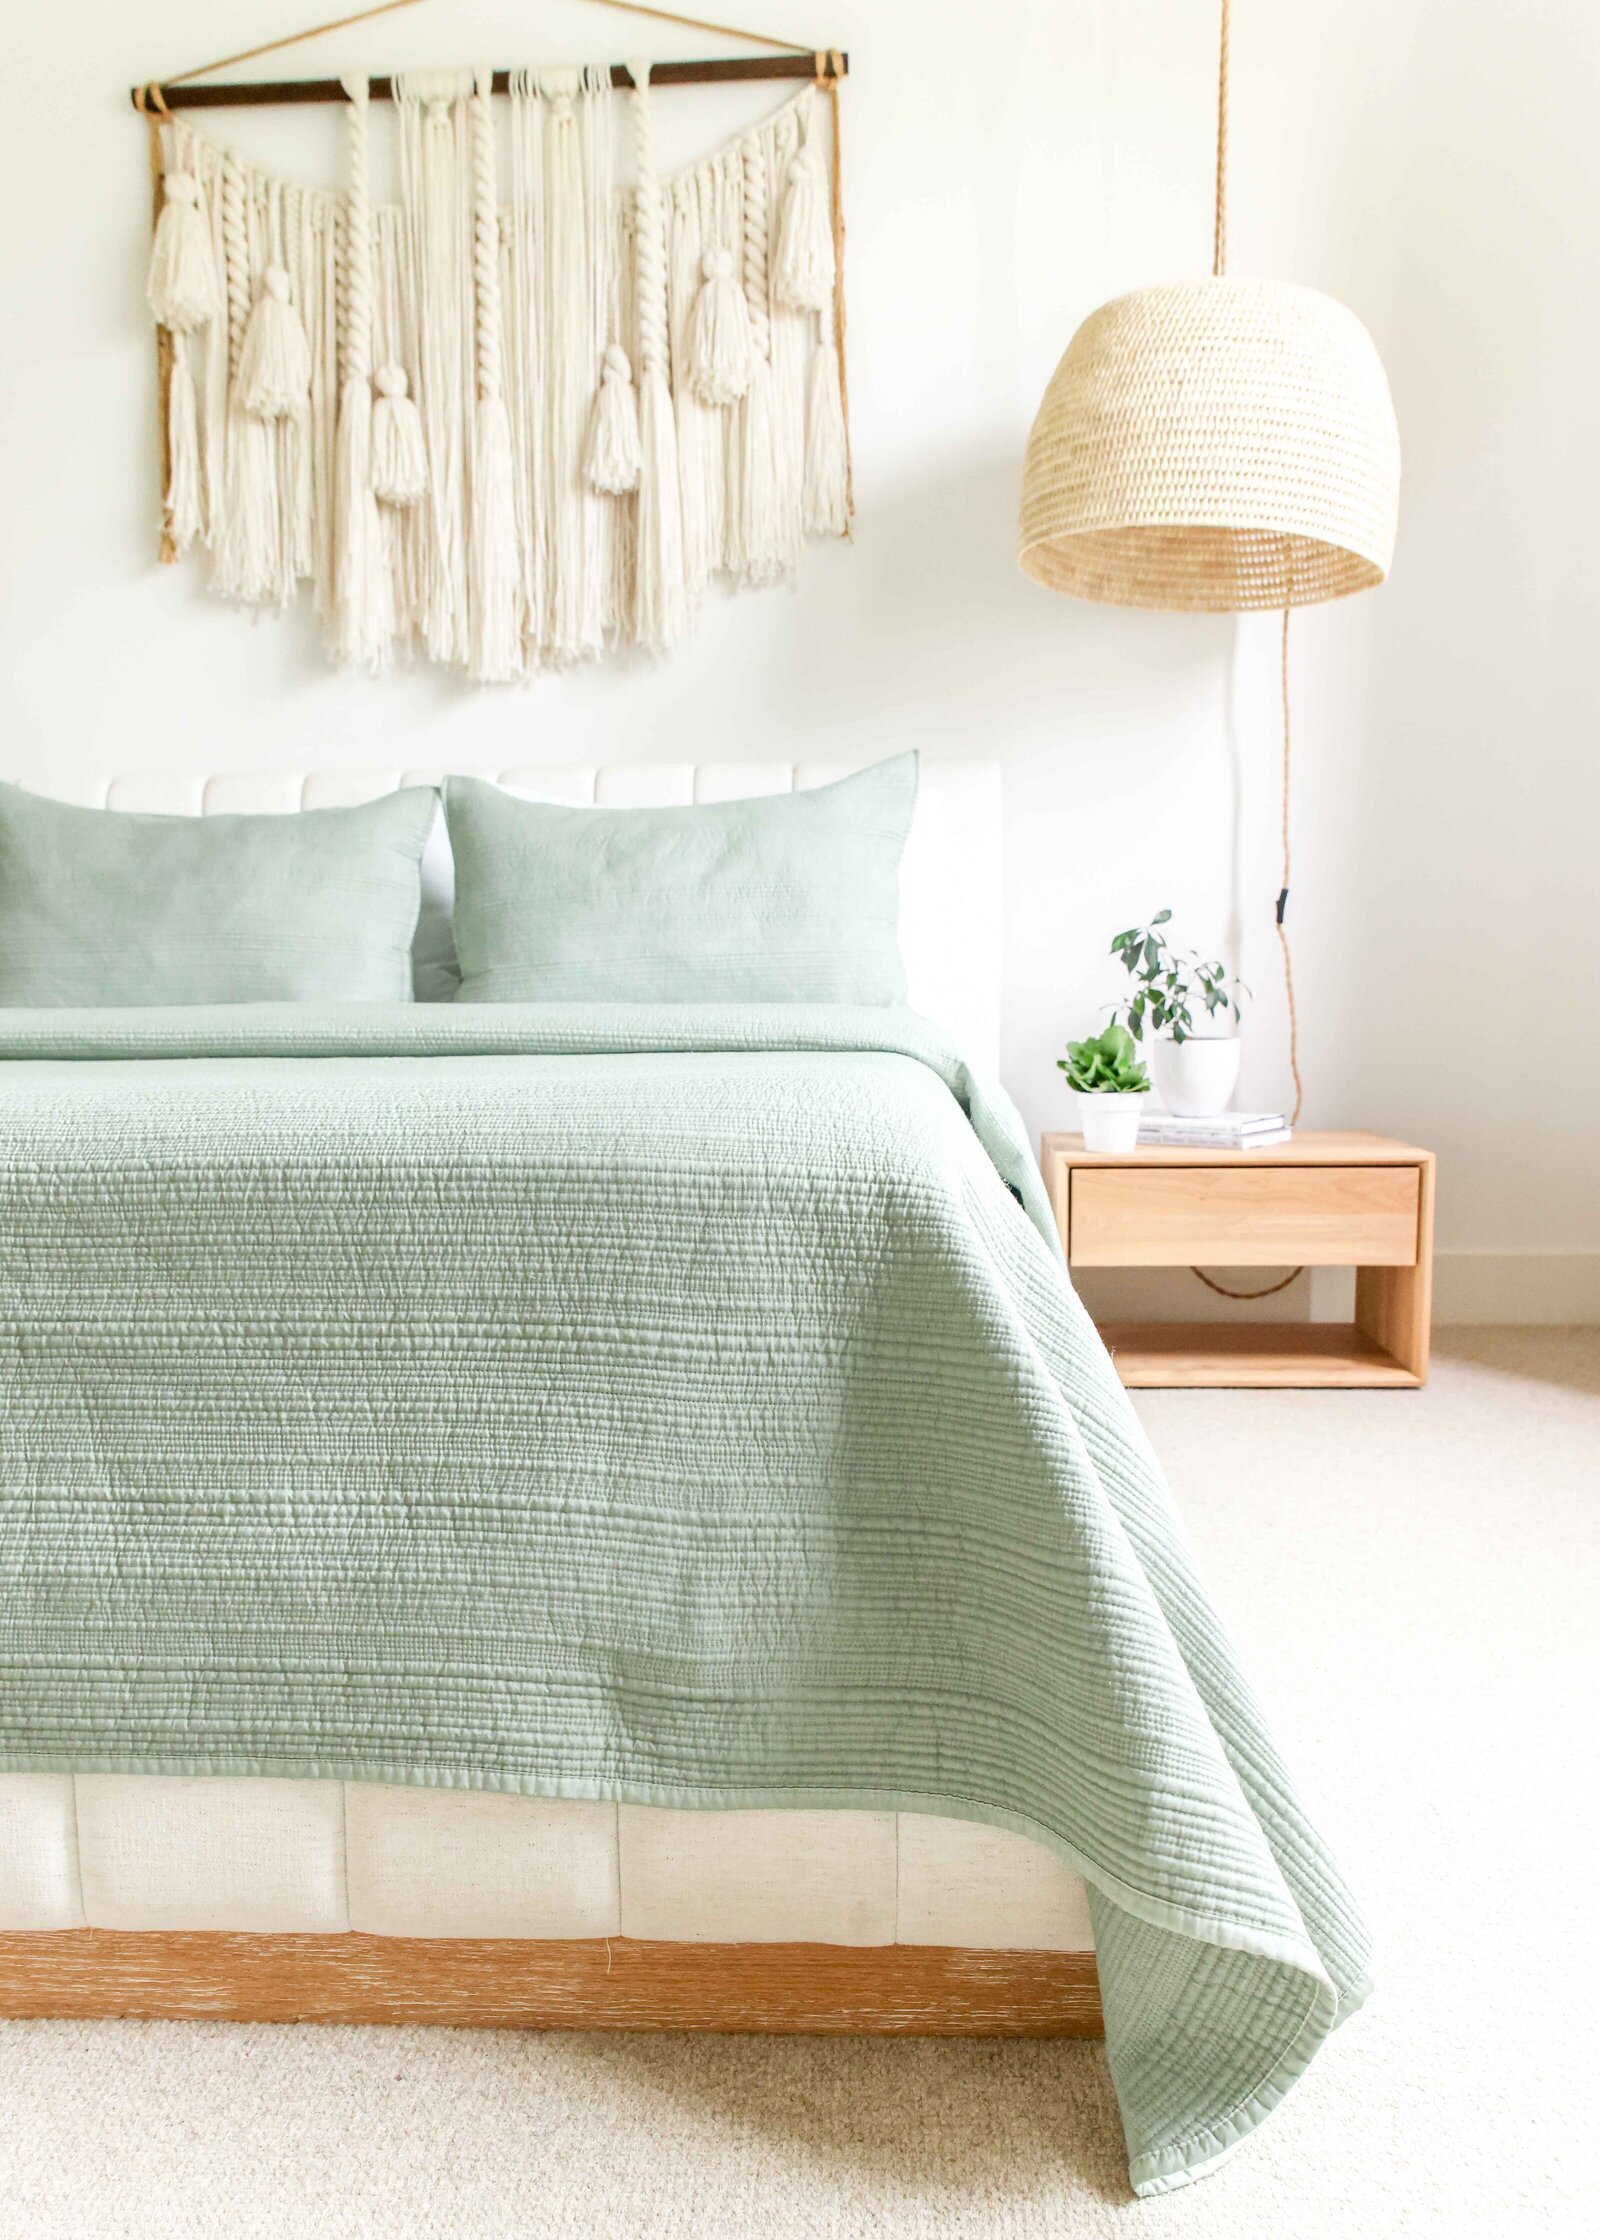 Luxury linen and product photographer Chelsea Loren based in San Diego